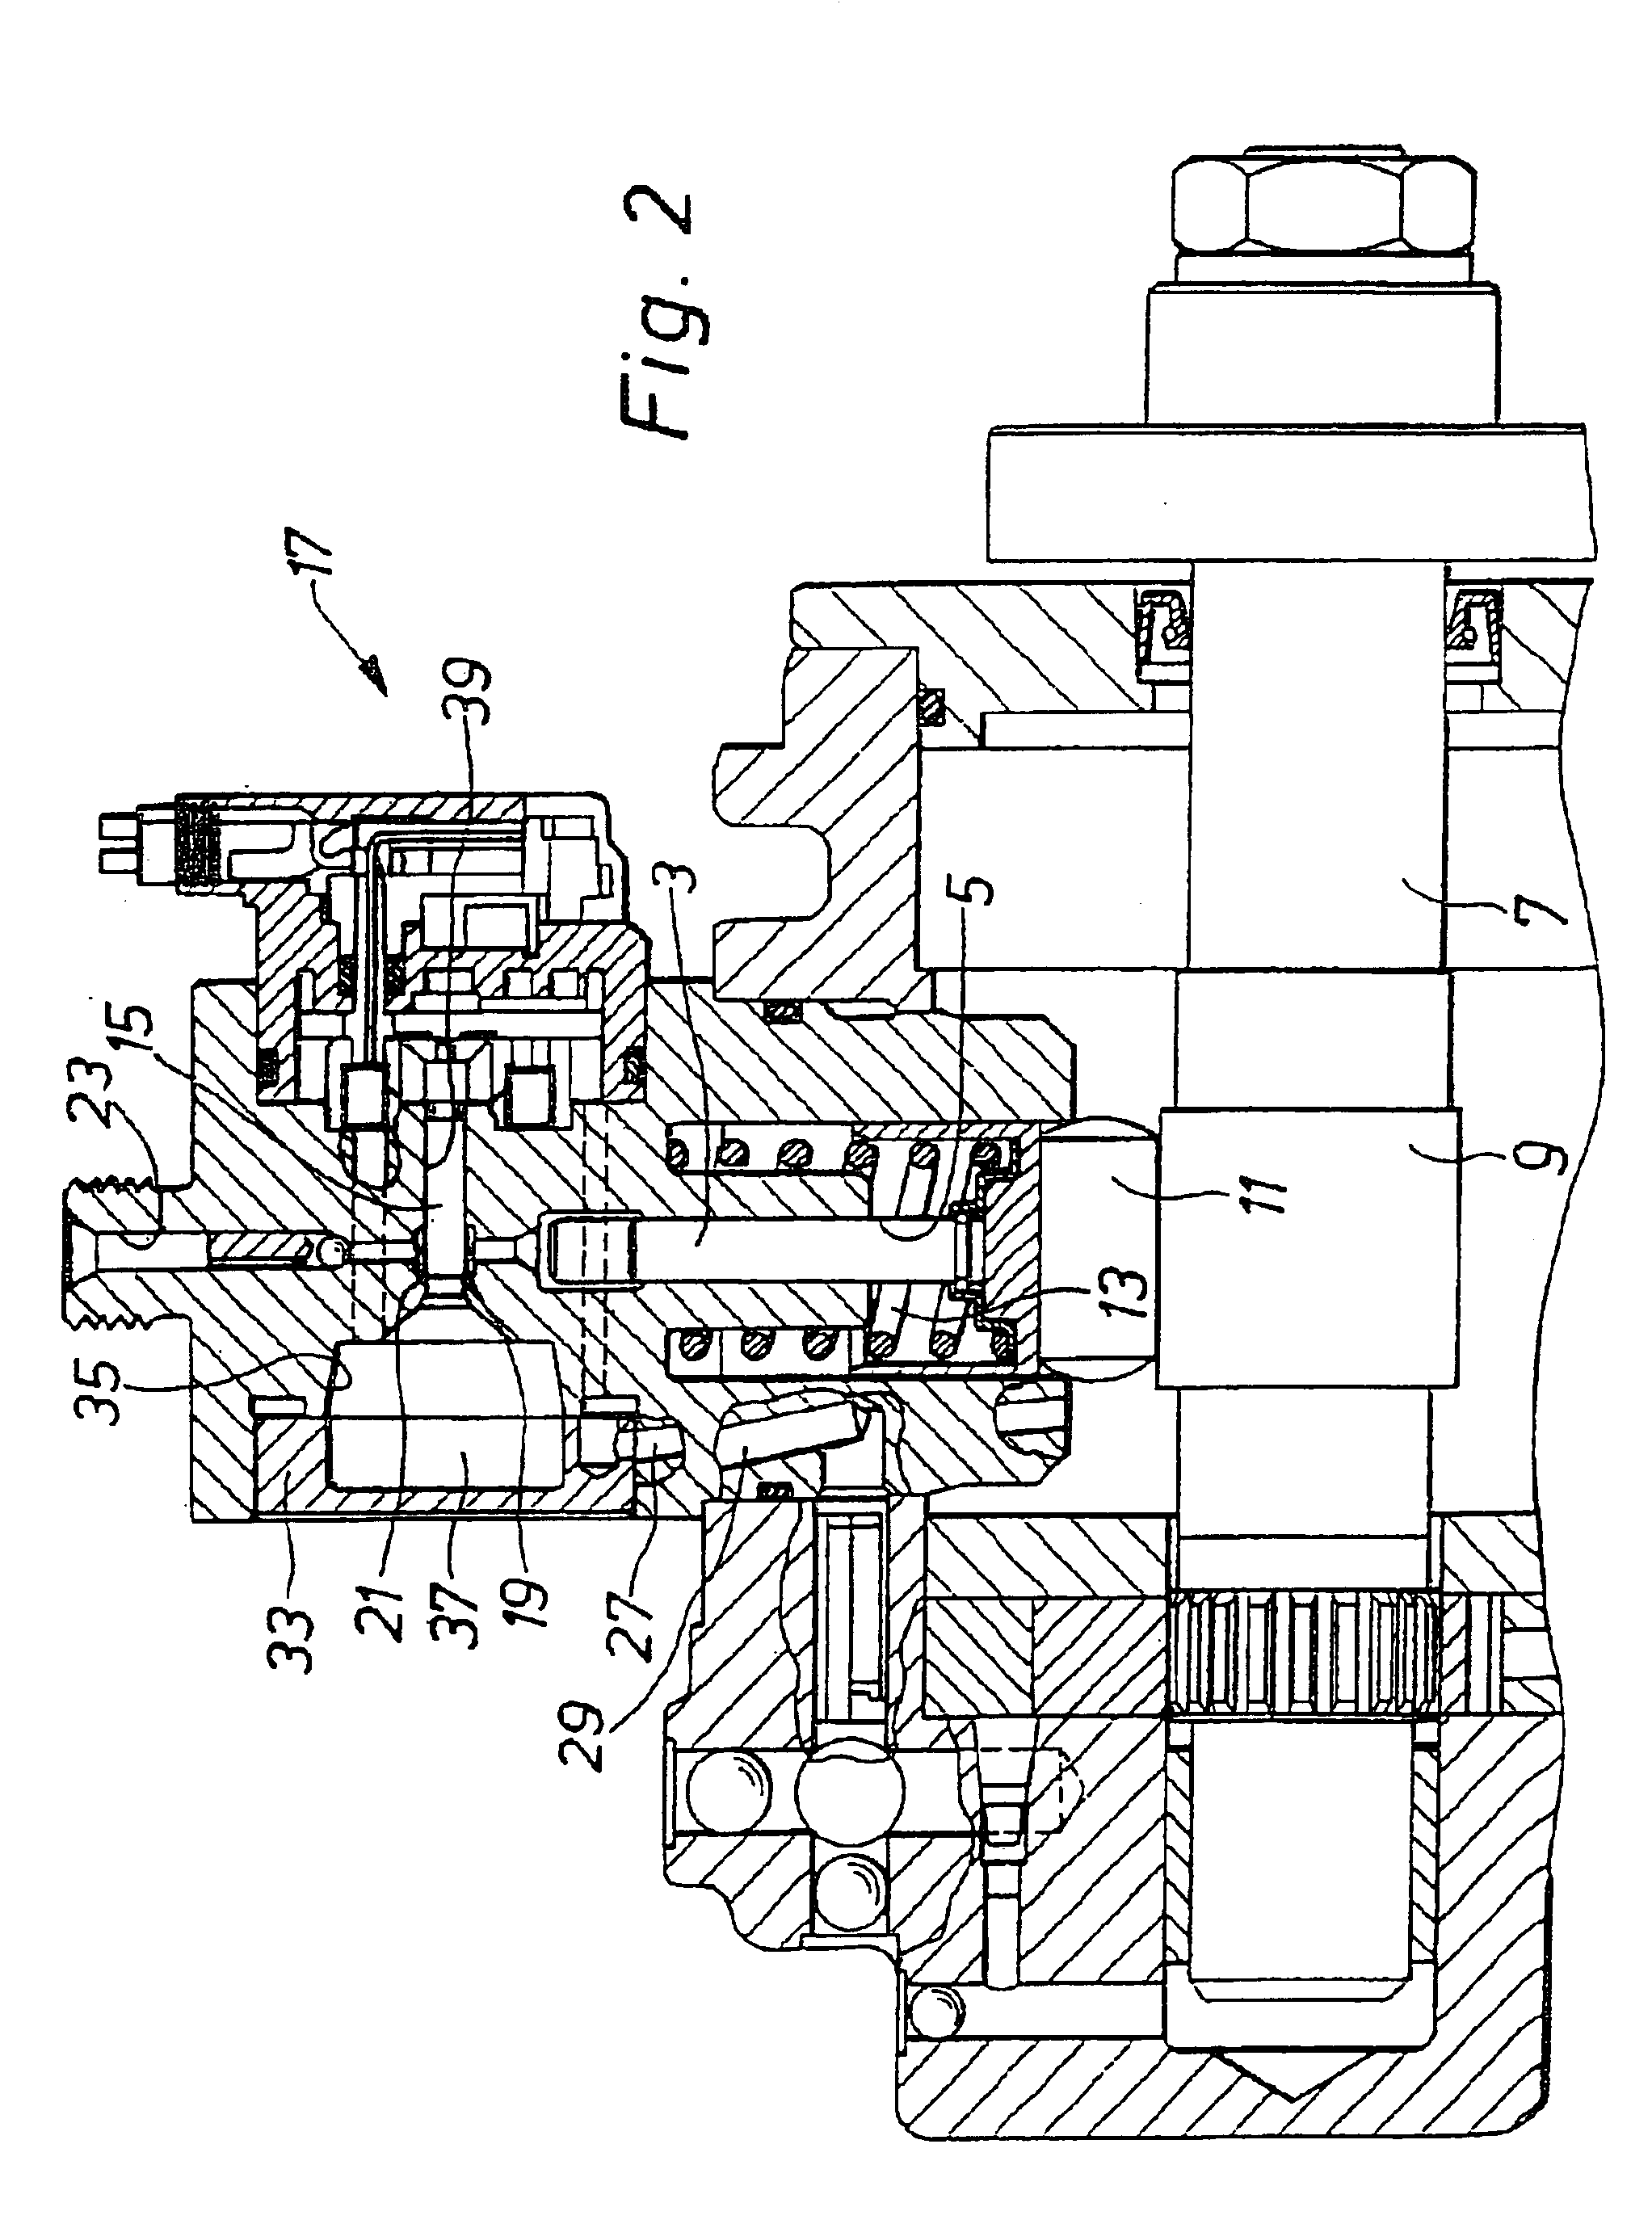 Single-die injection pump for a common rail fuel injection system